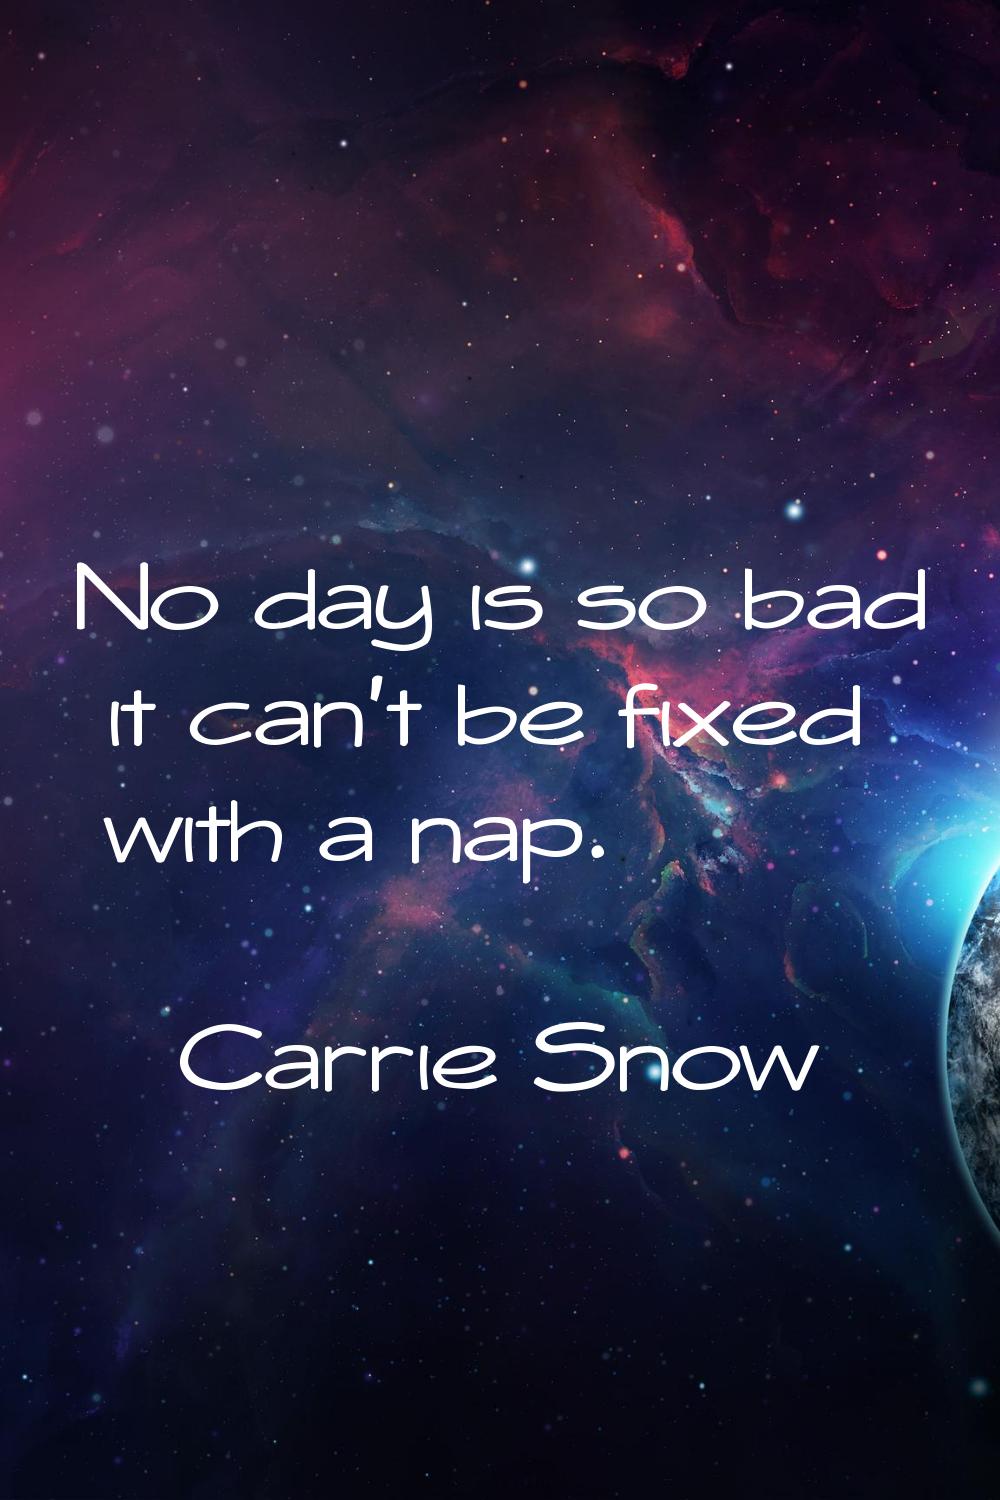 No day is so bad it can't be fixed with a nap.